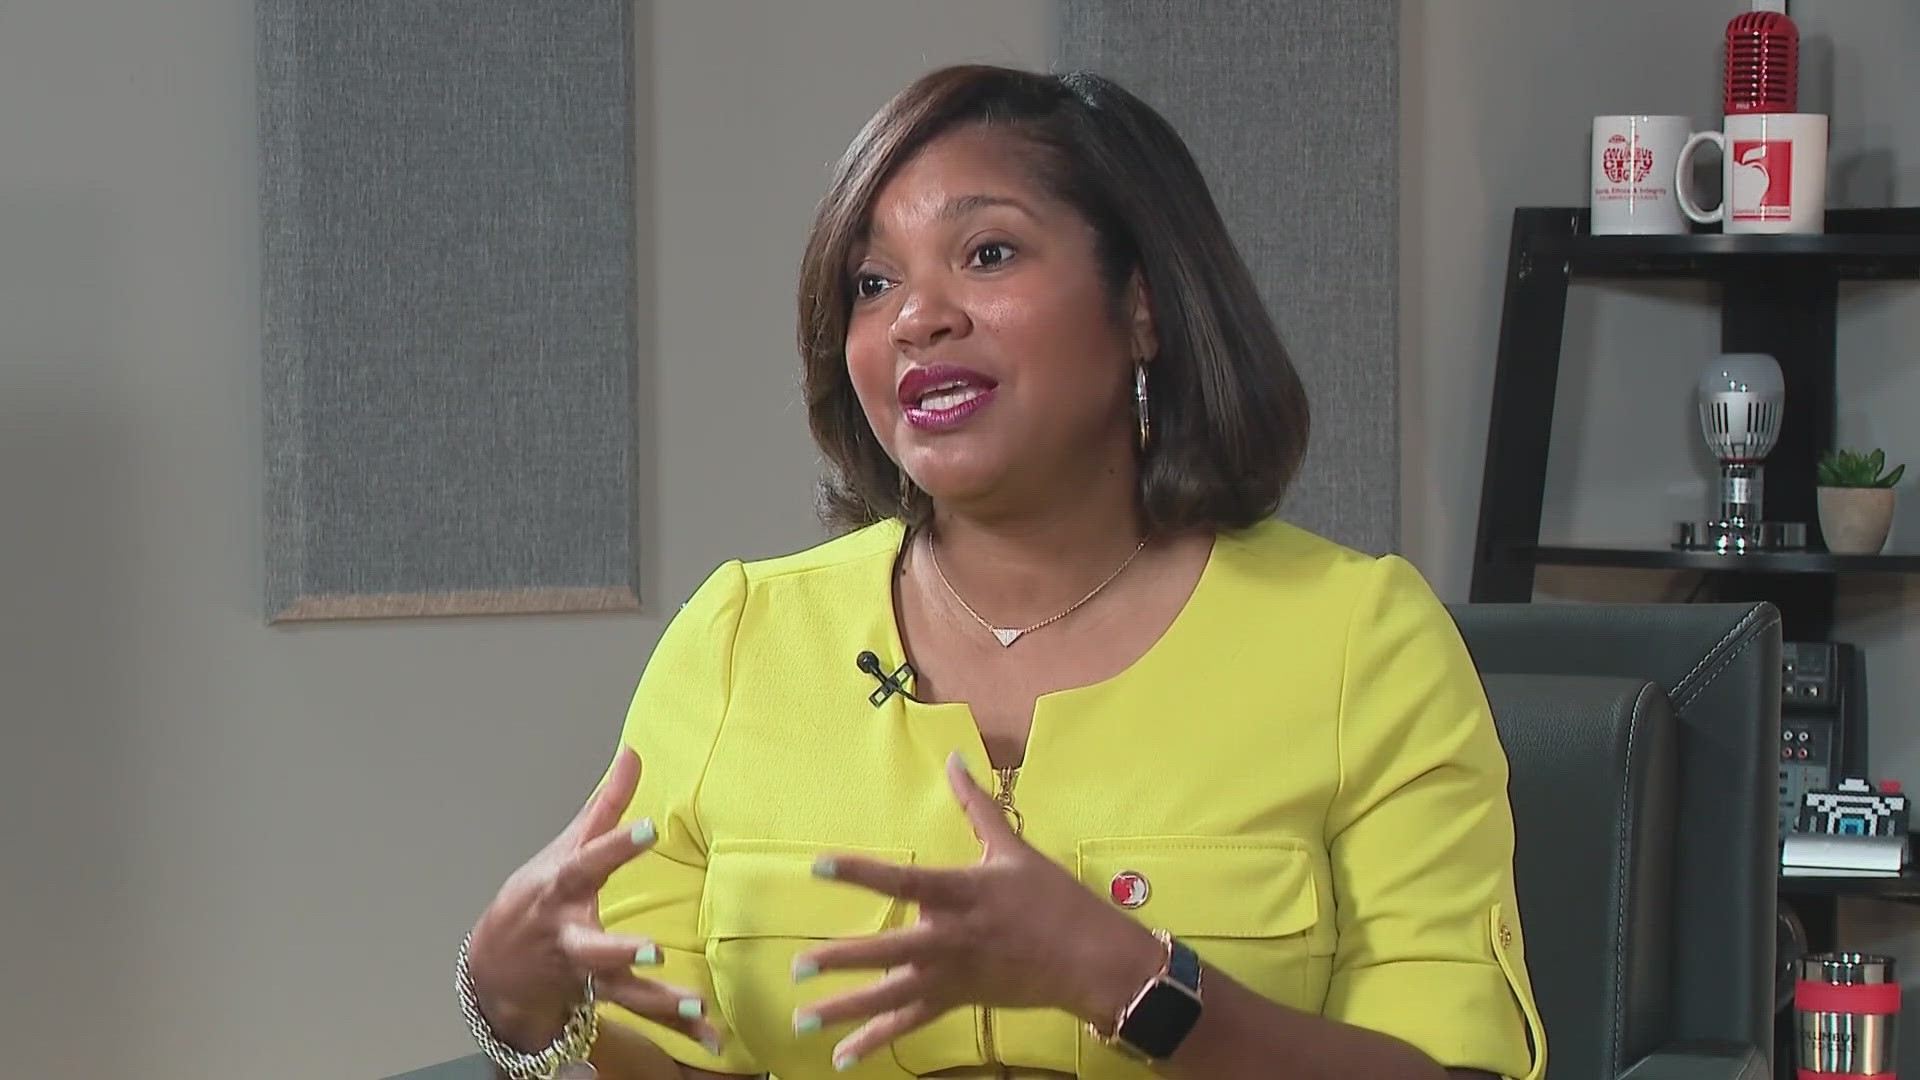 Dr. Angela Chapman, Columbus City Schools District's new leader, sat down with 10TV and detailed plans for the upcoming school year as she steps into her new role.